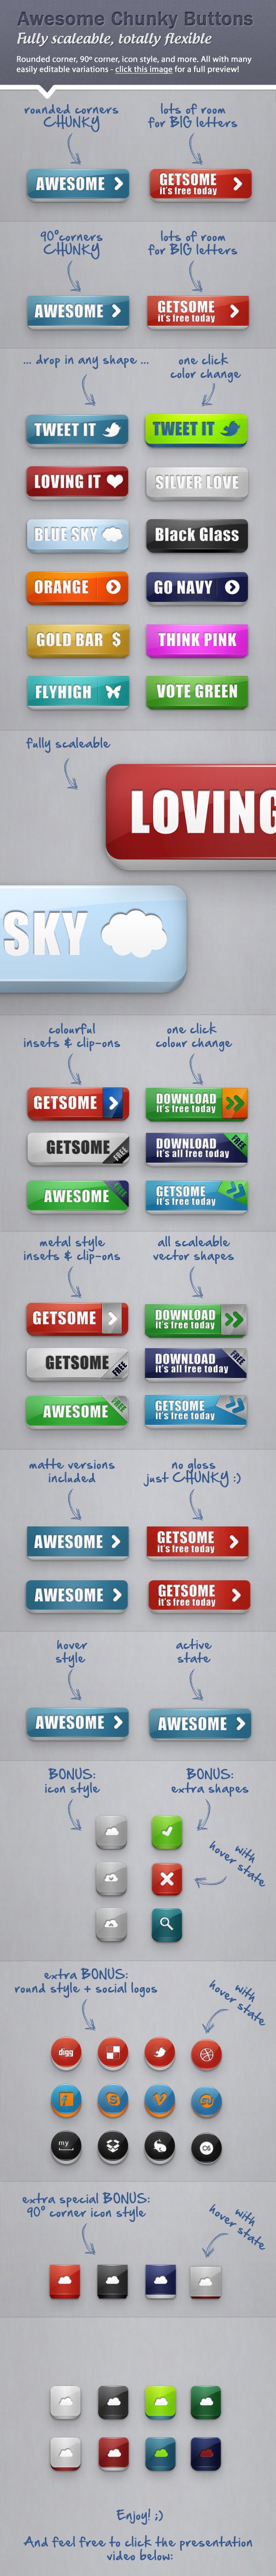 Awesome chunky web buttons preview image.